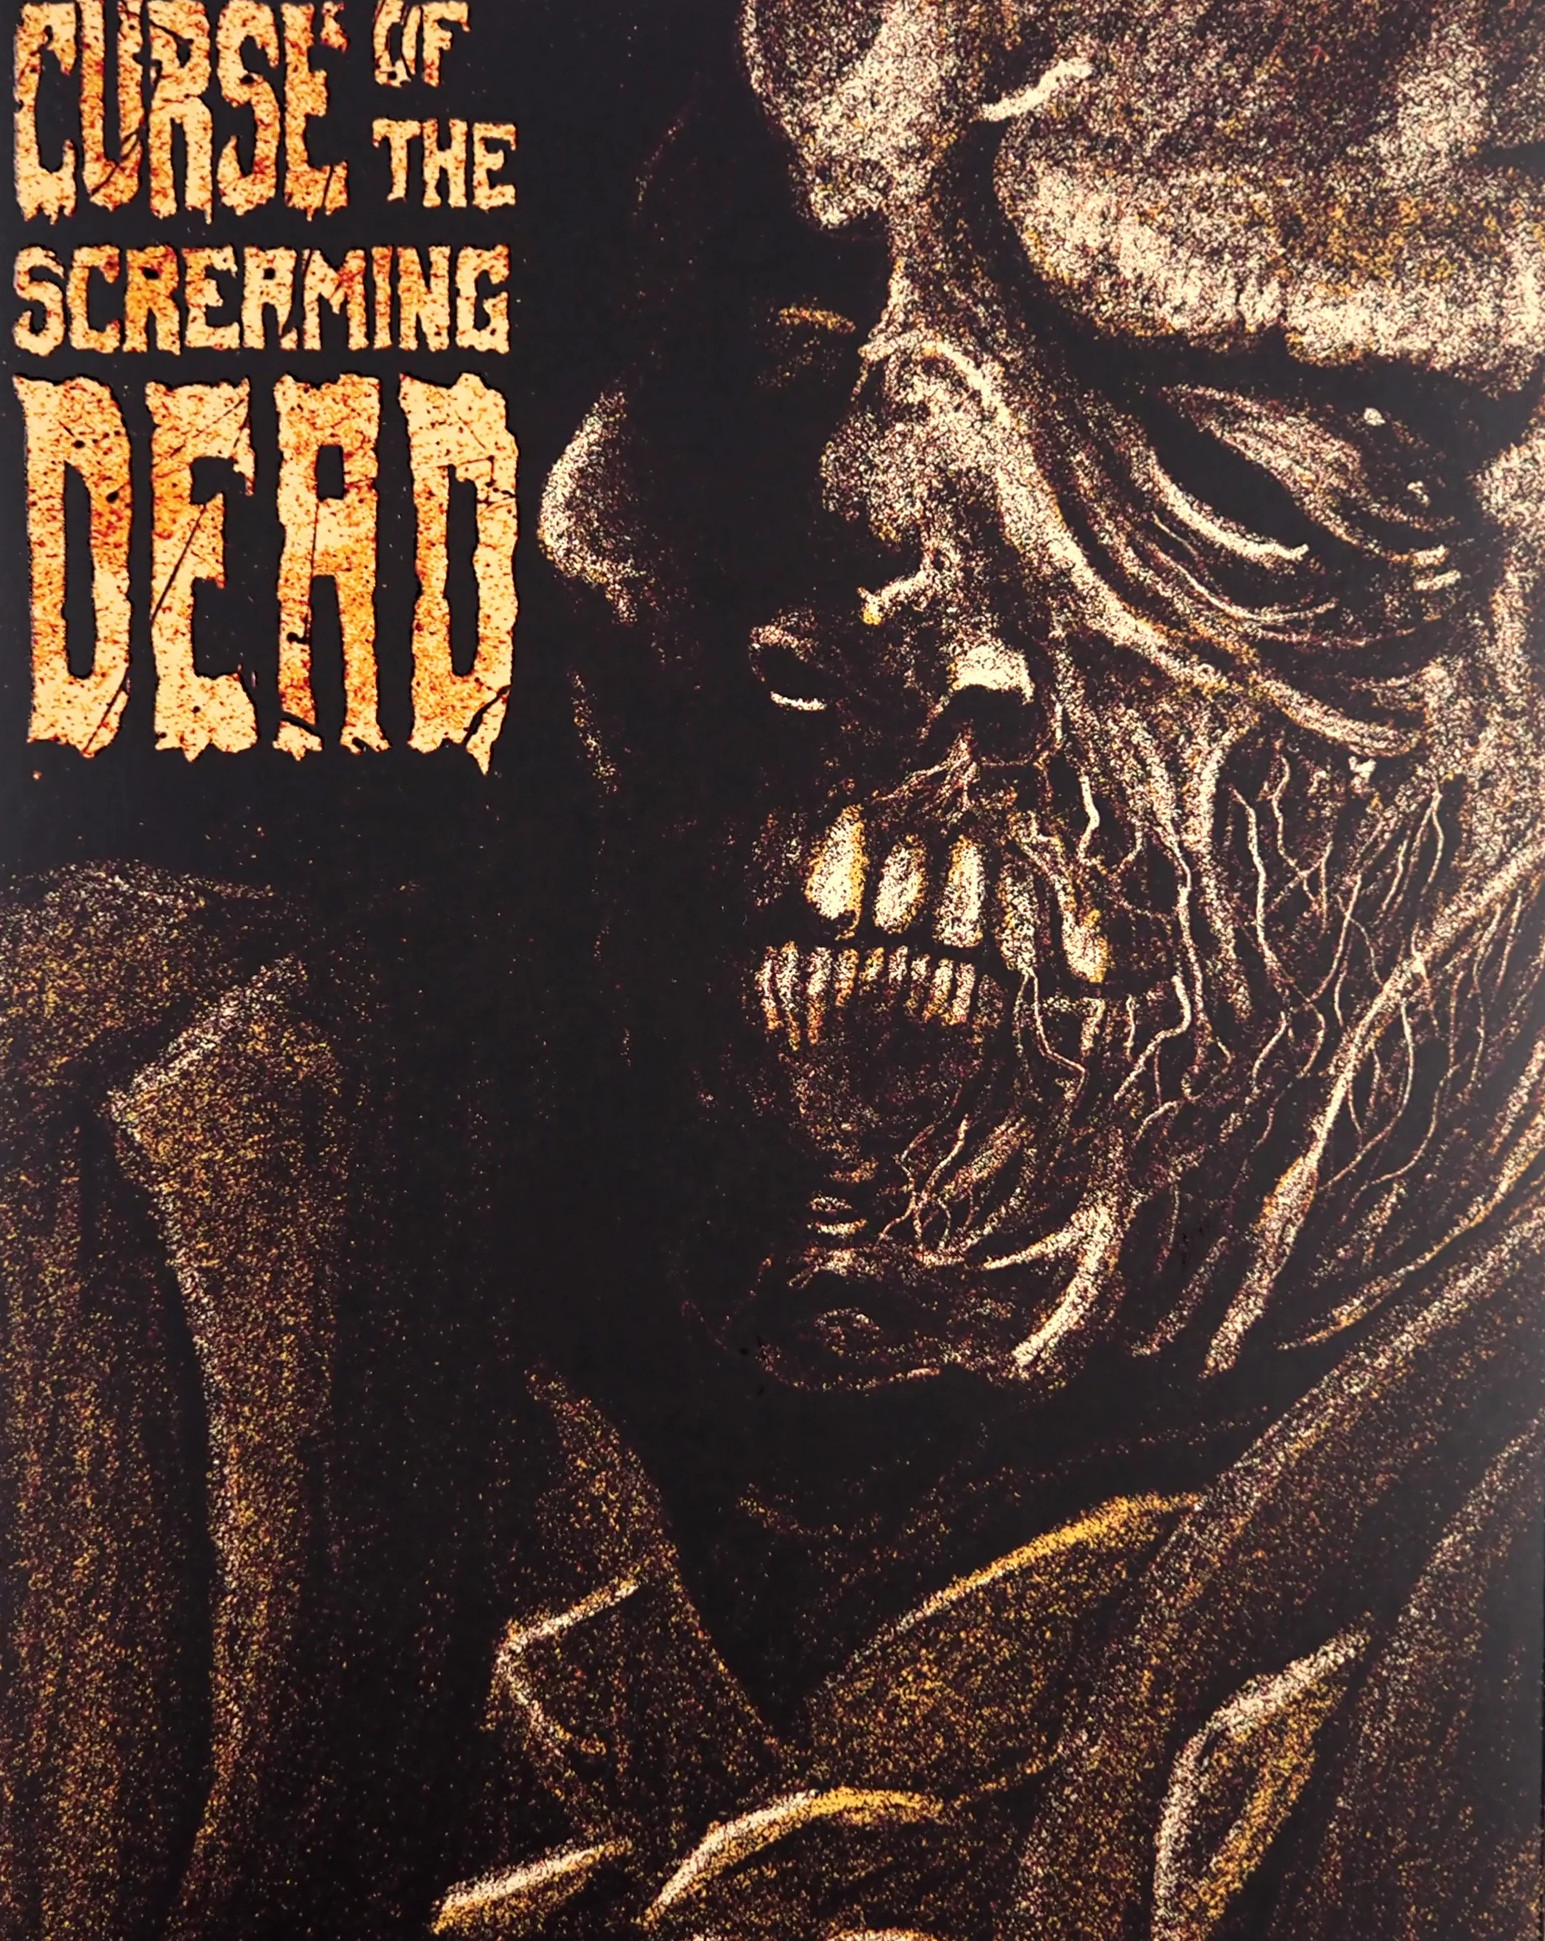 The Curse of the Screaming Dead